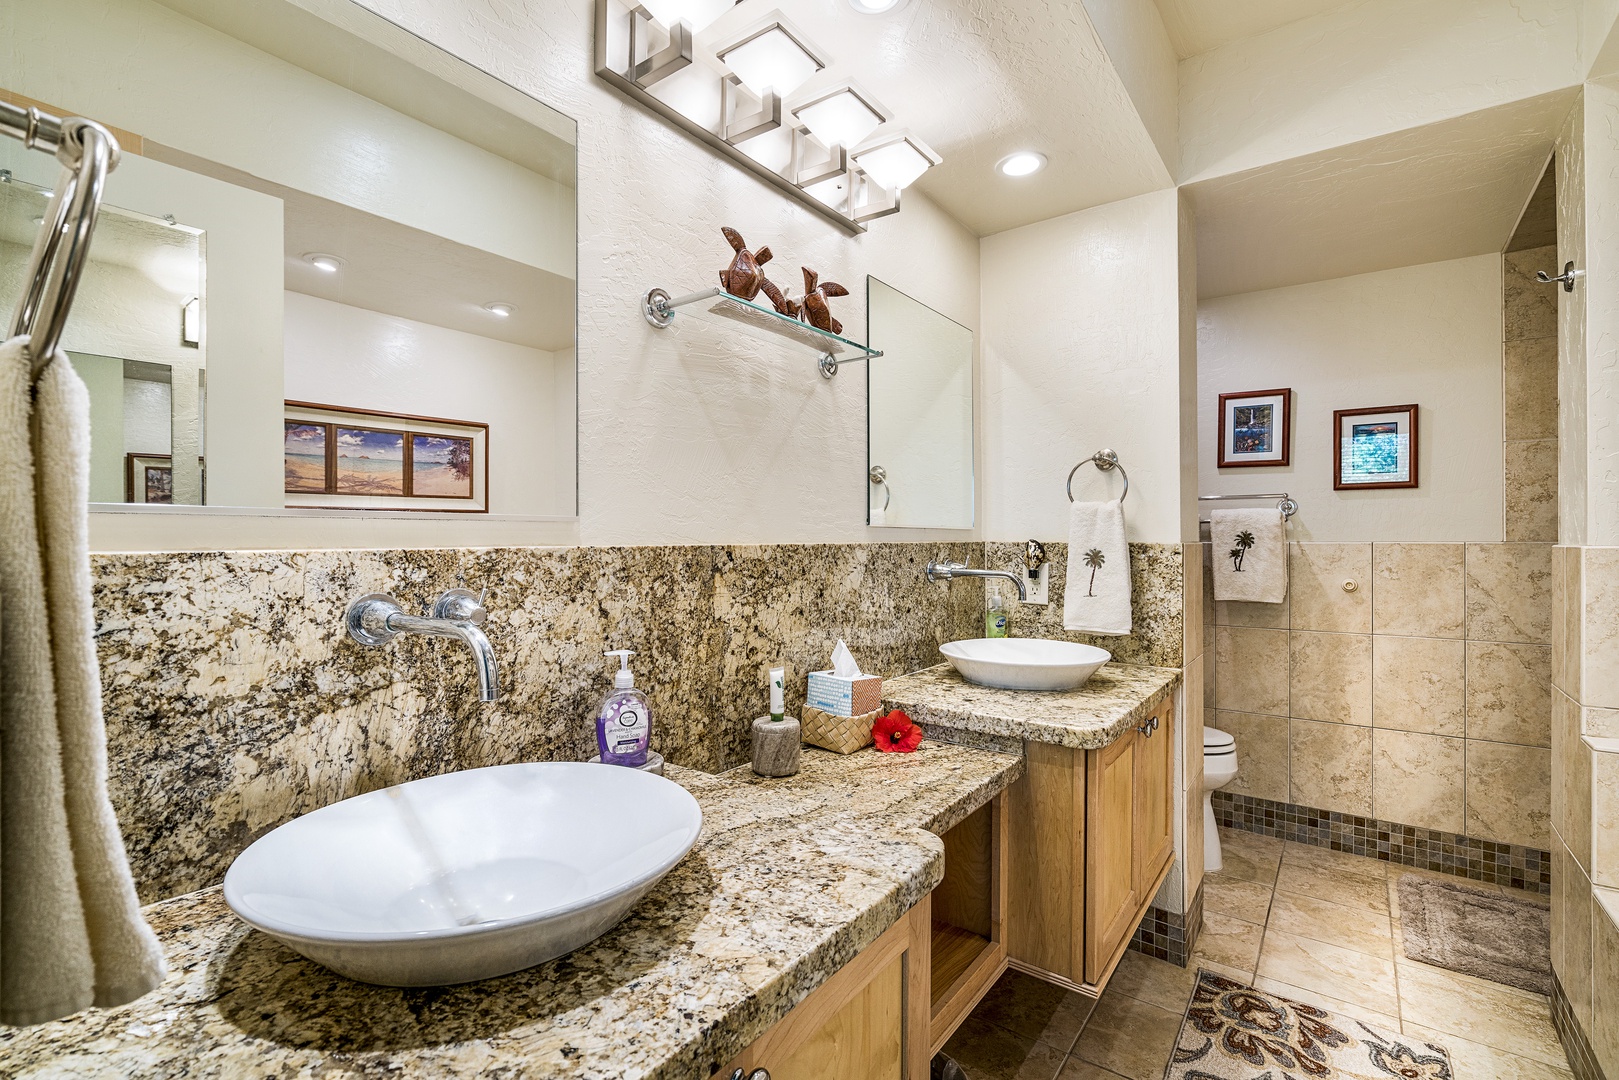 Kailua Kona Vacation Rentals, Casa De Emdeko 336 - High end finishes in the fully remodeled primary bath!